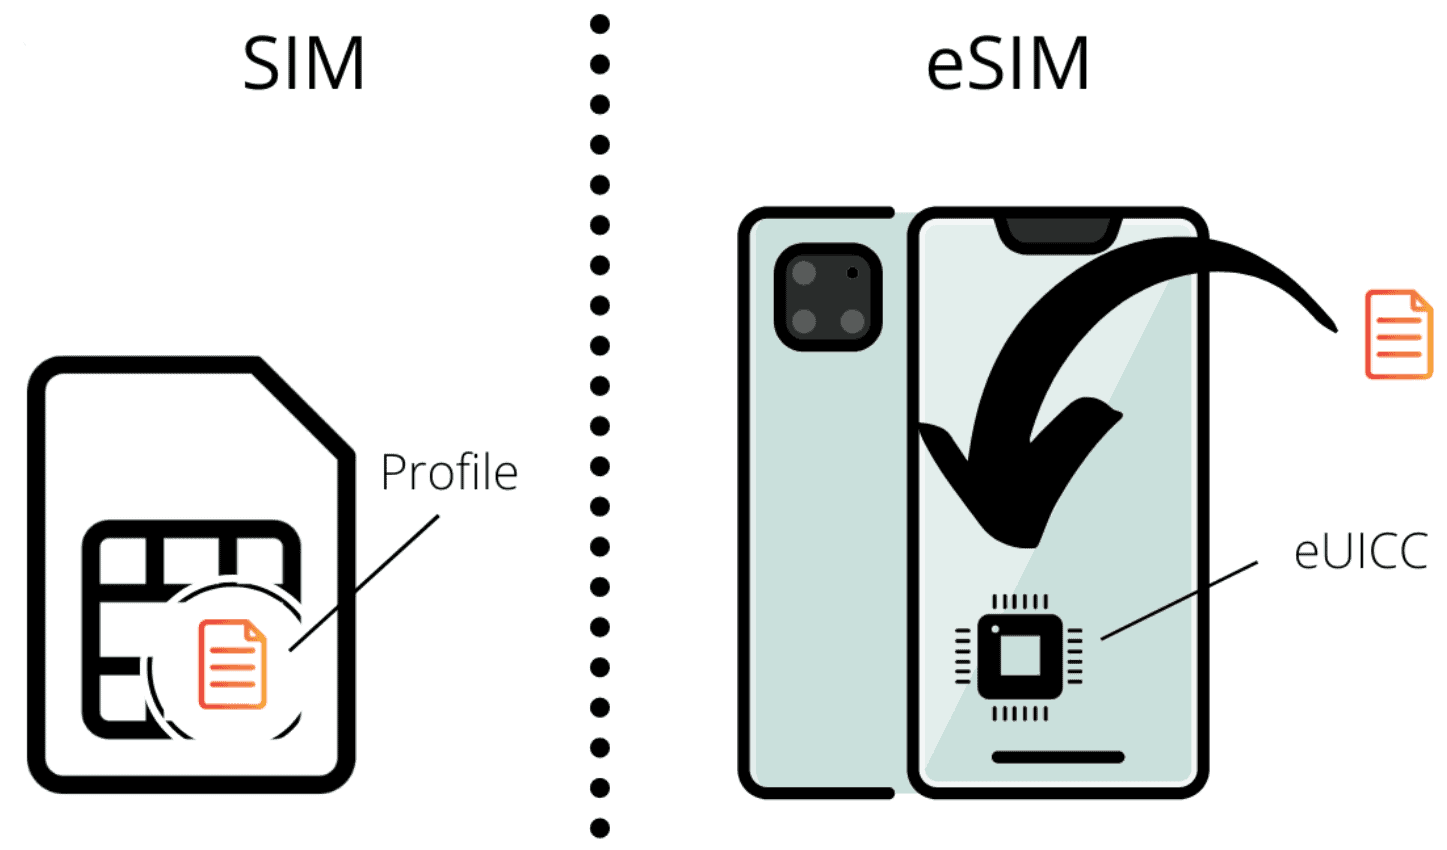 What's the difference between eSIM and SIM?